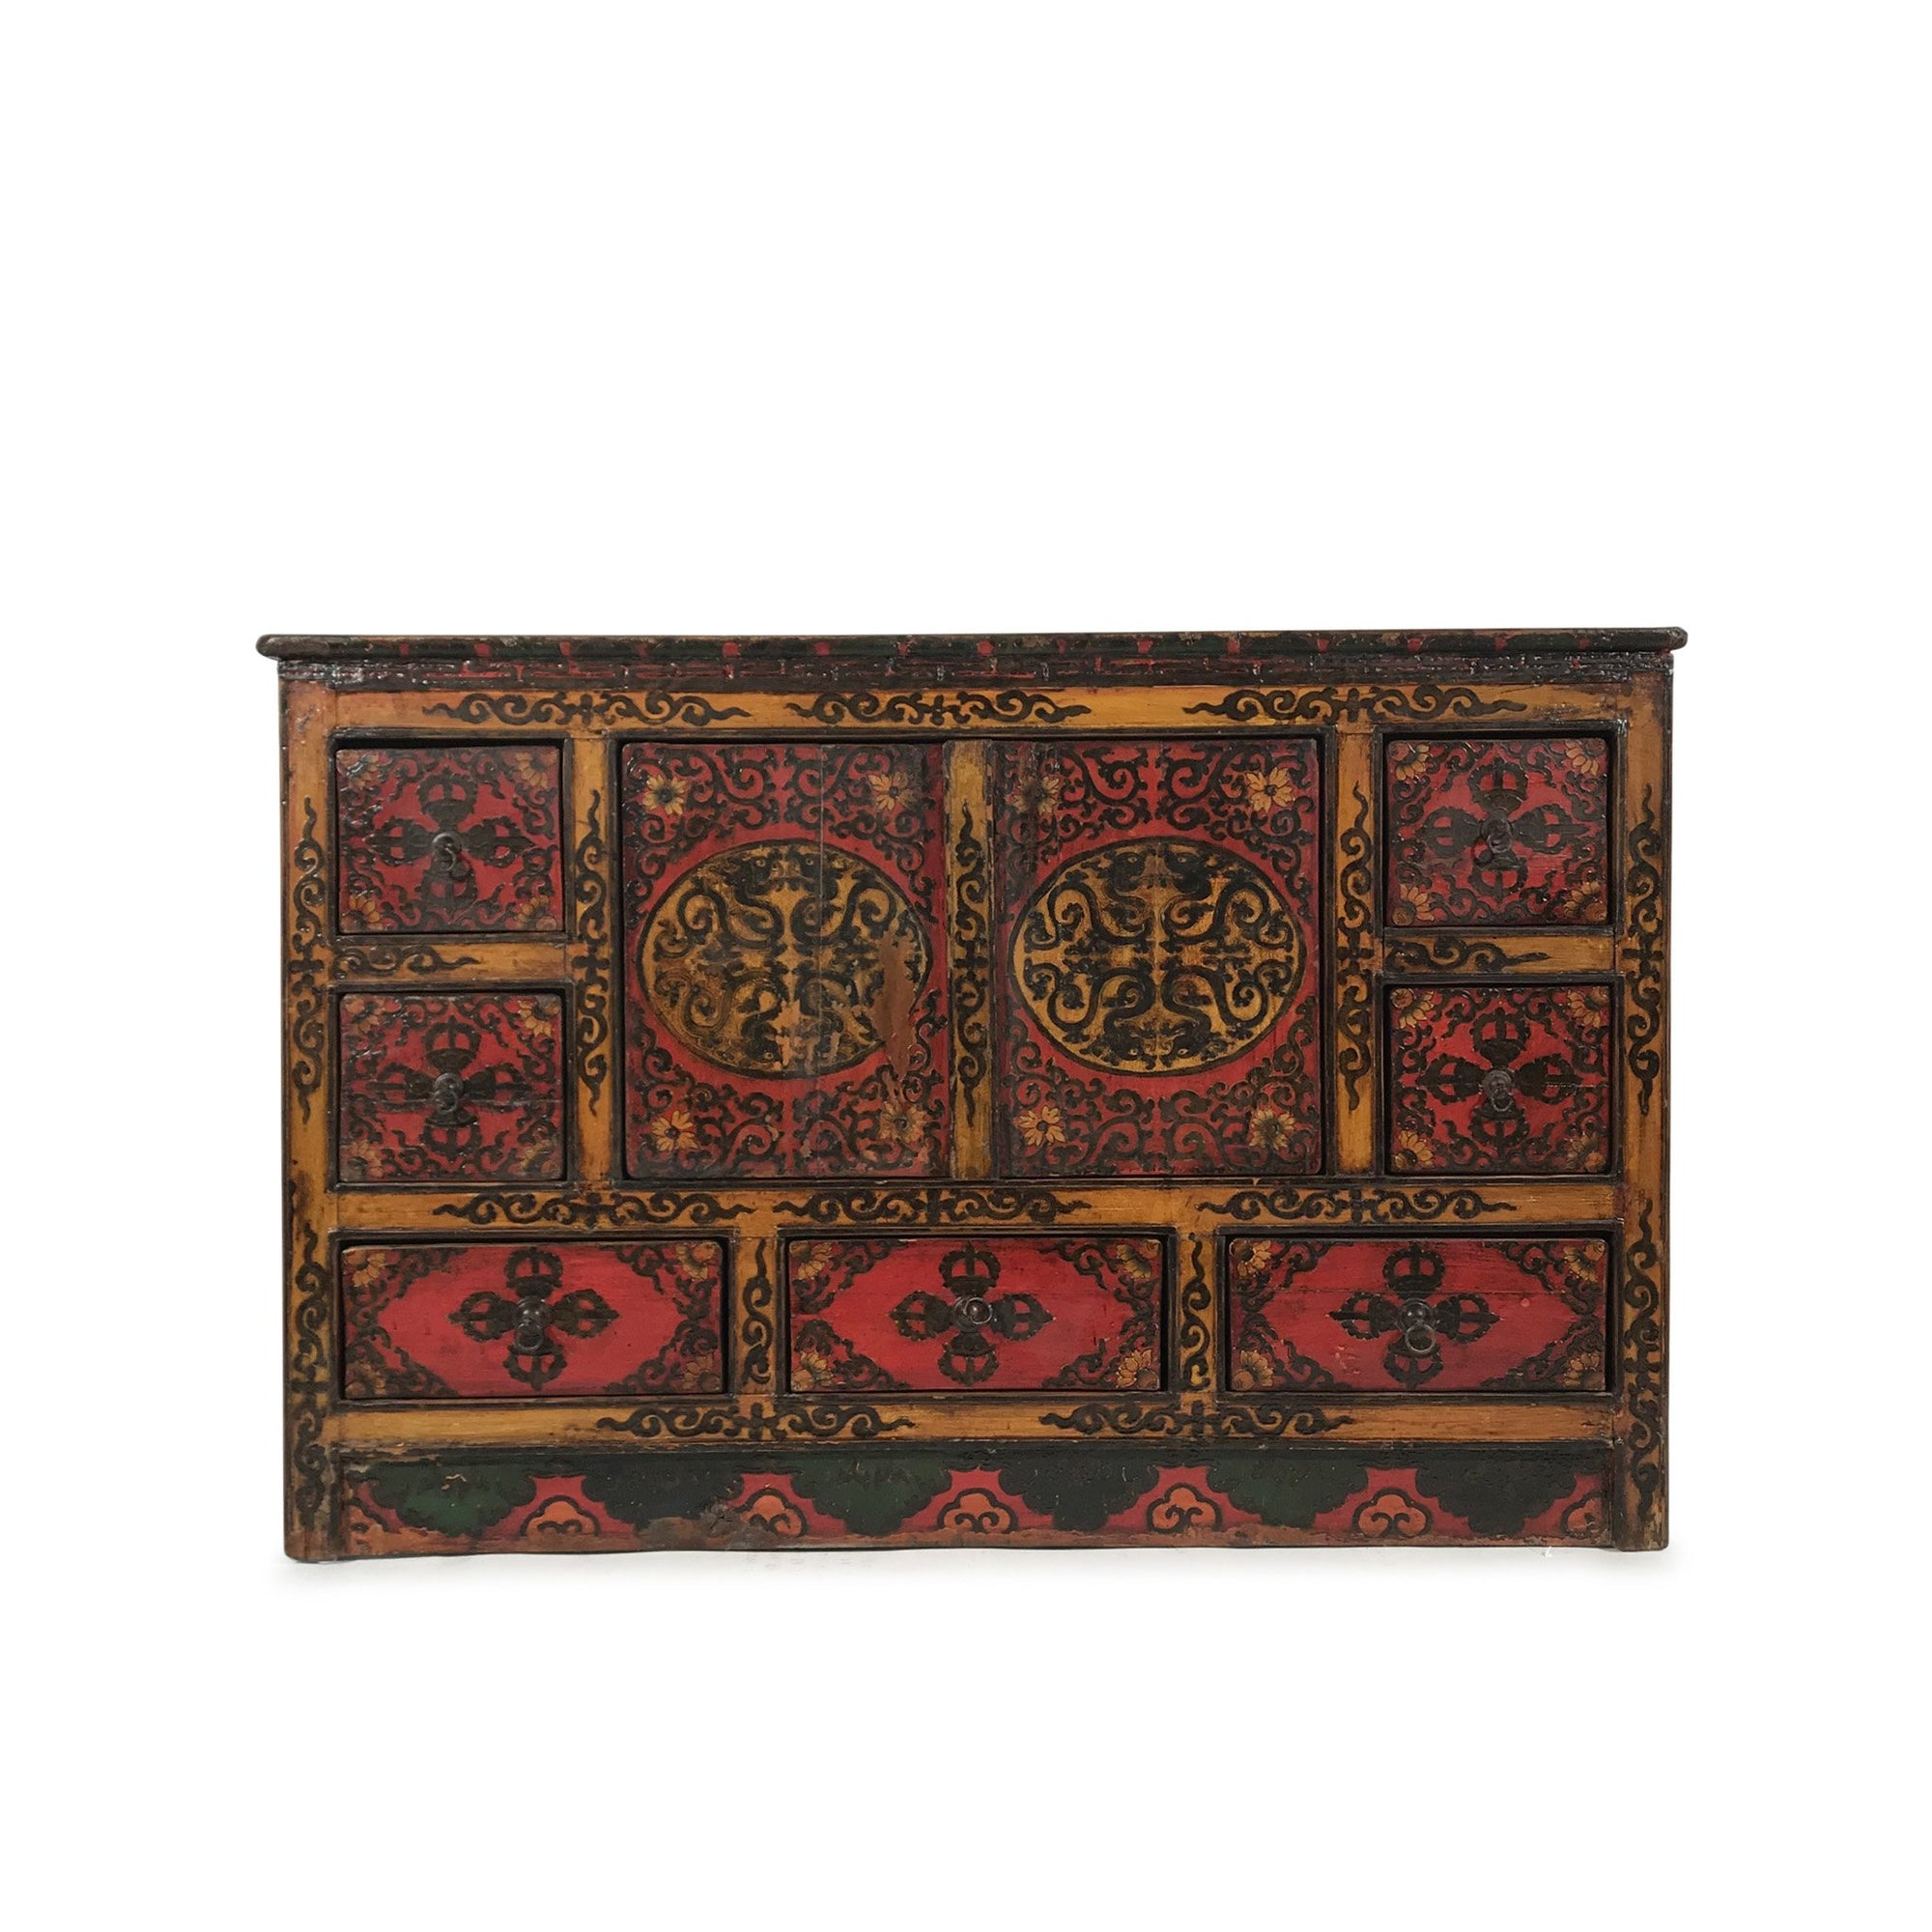 Reproduction Painted Altar Cabinet From Tibet - 126 x 46 x 83 (wxdxh cms) - C1526